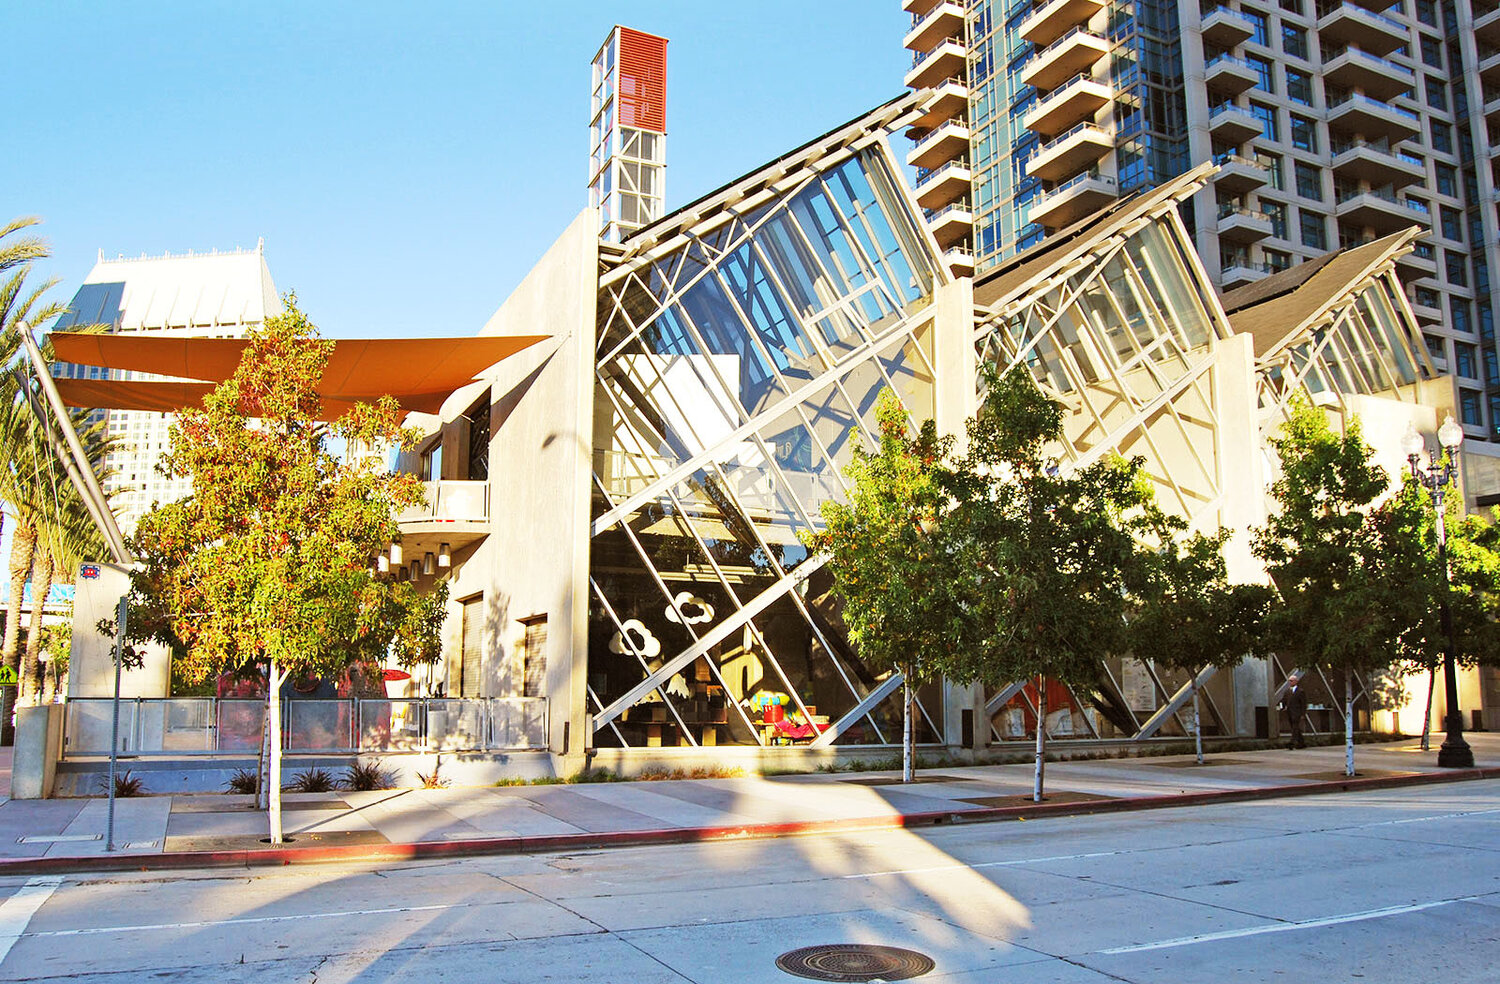 The New Children's Museum in Downtown San Diego.